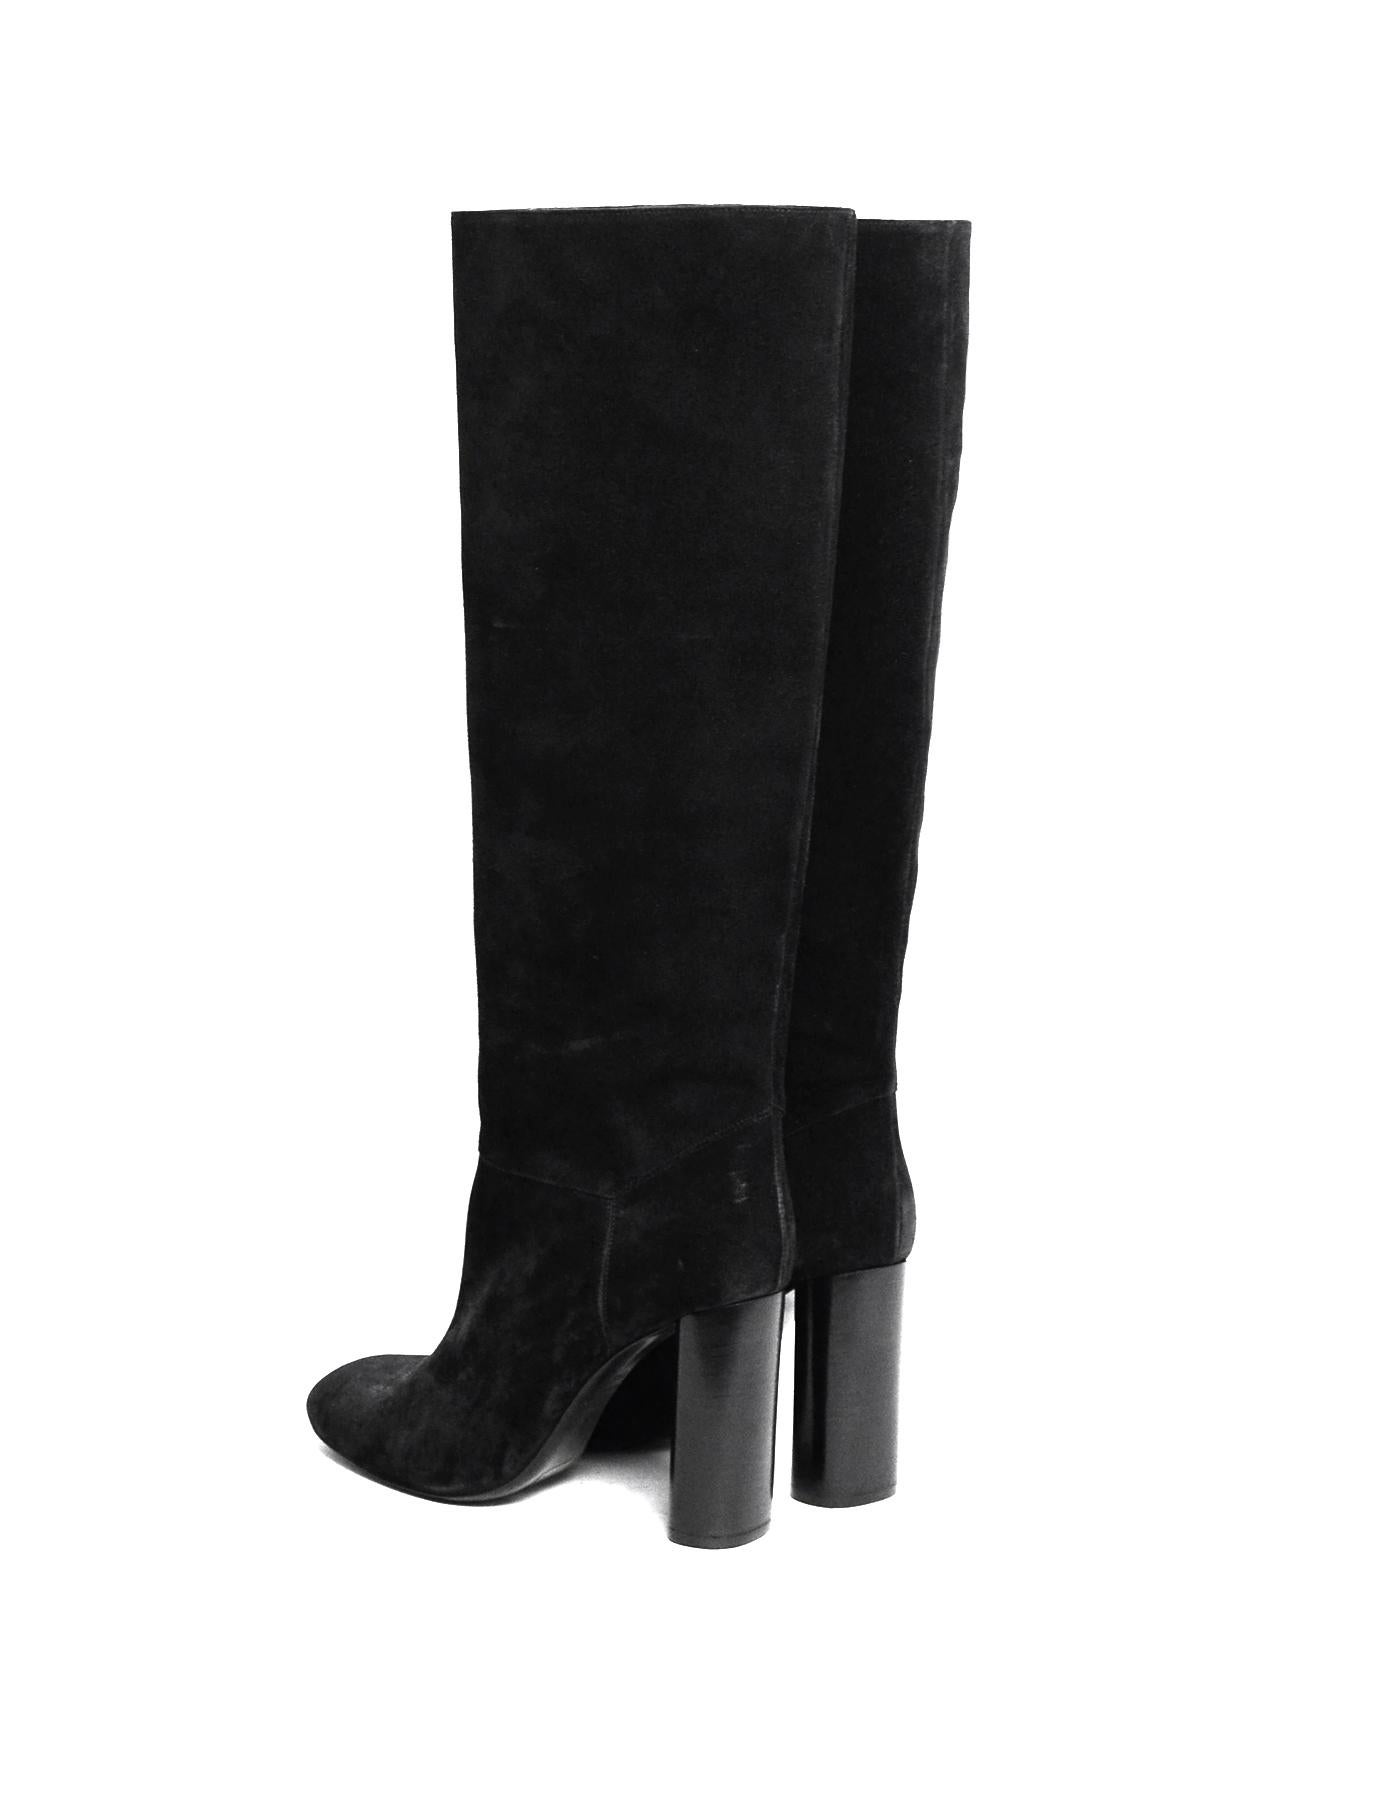 Lanvin Black Suede Knee-High Boots sz 39.5  In Excellent Condition In New York, NY